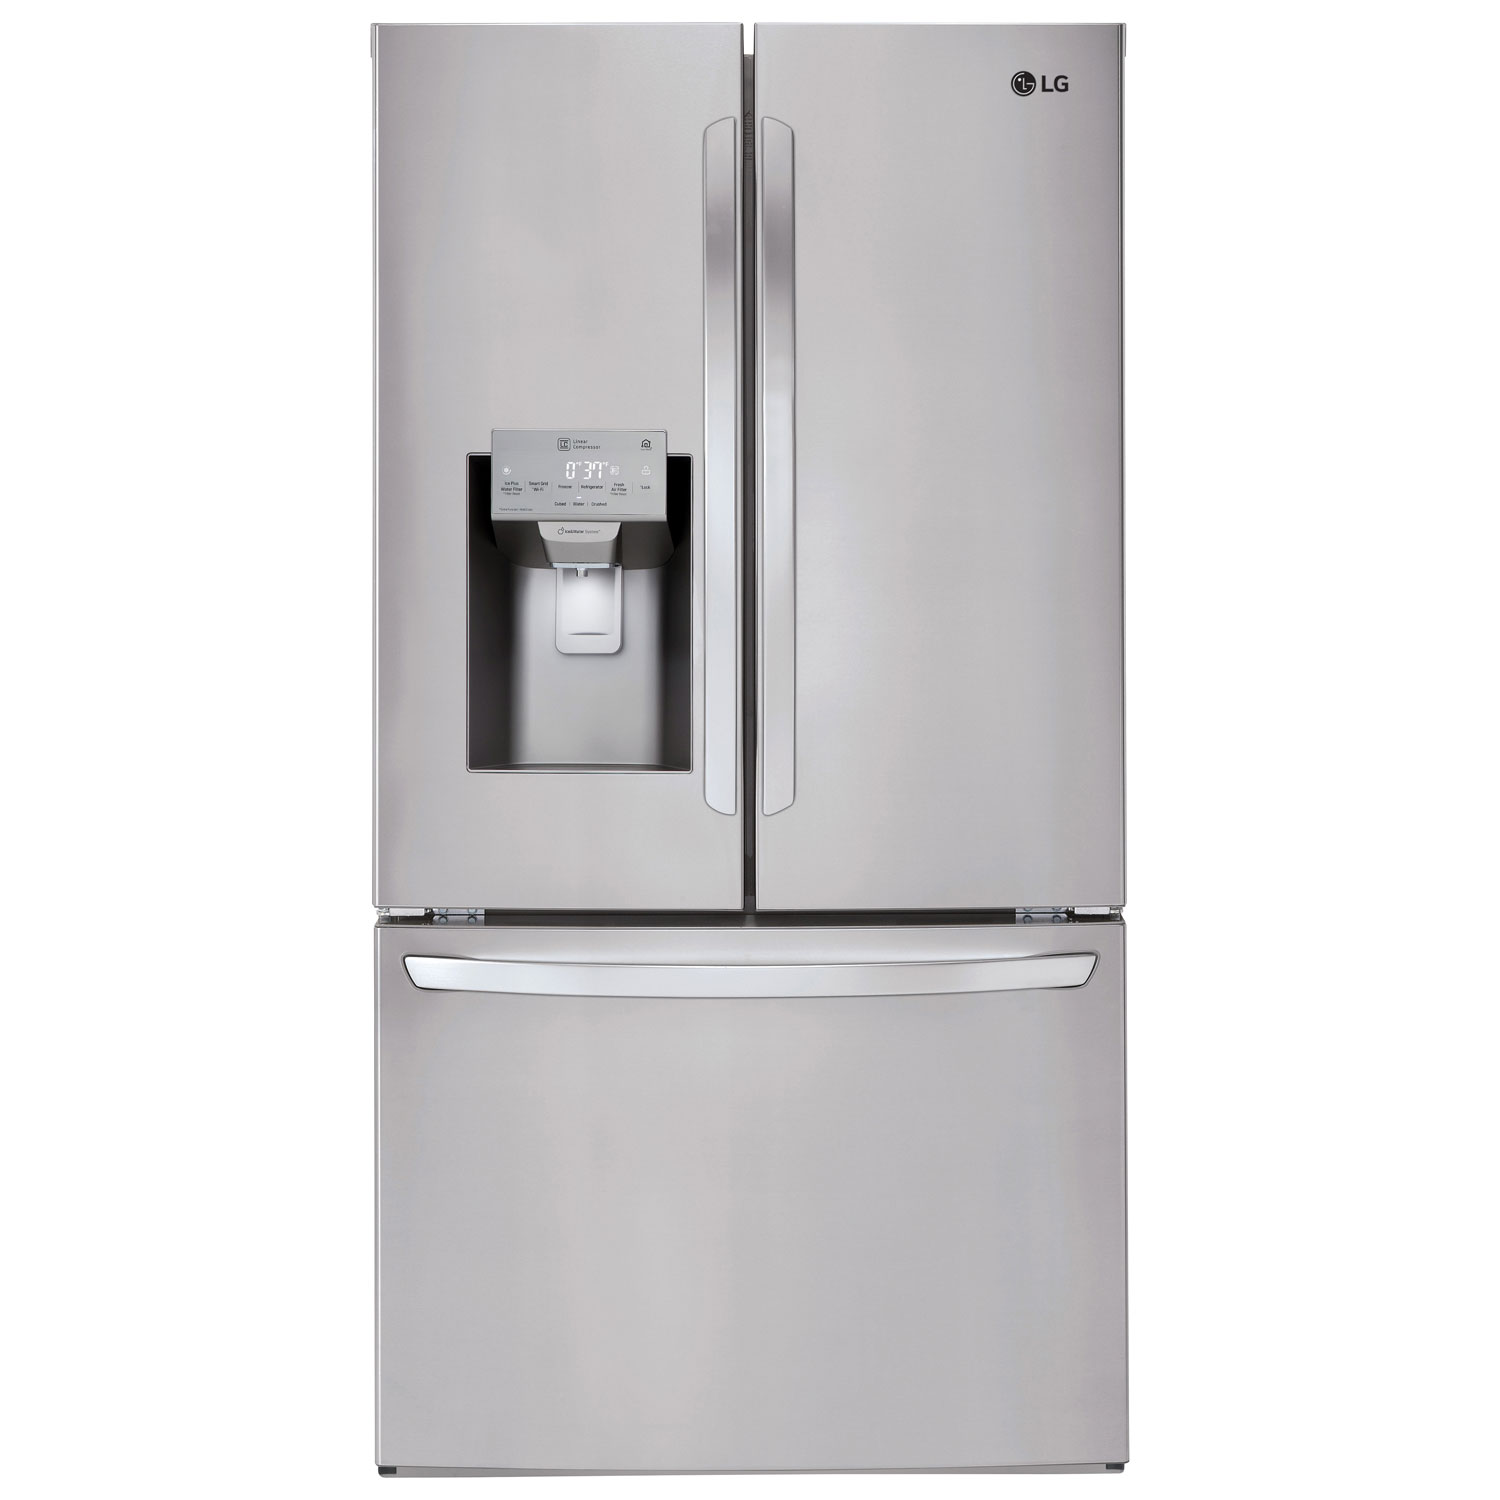 LG 36" 26.2 Cu.Ft. French Door Refrigerator with Water & Ice Dispenser (LFXS26973S) -Stainless Steel